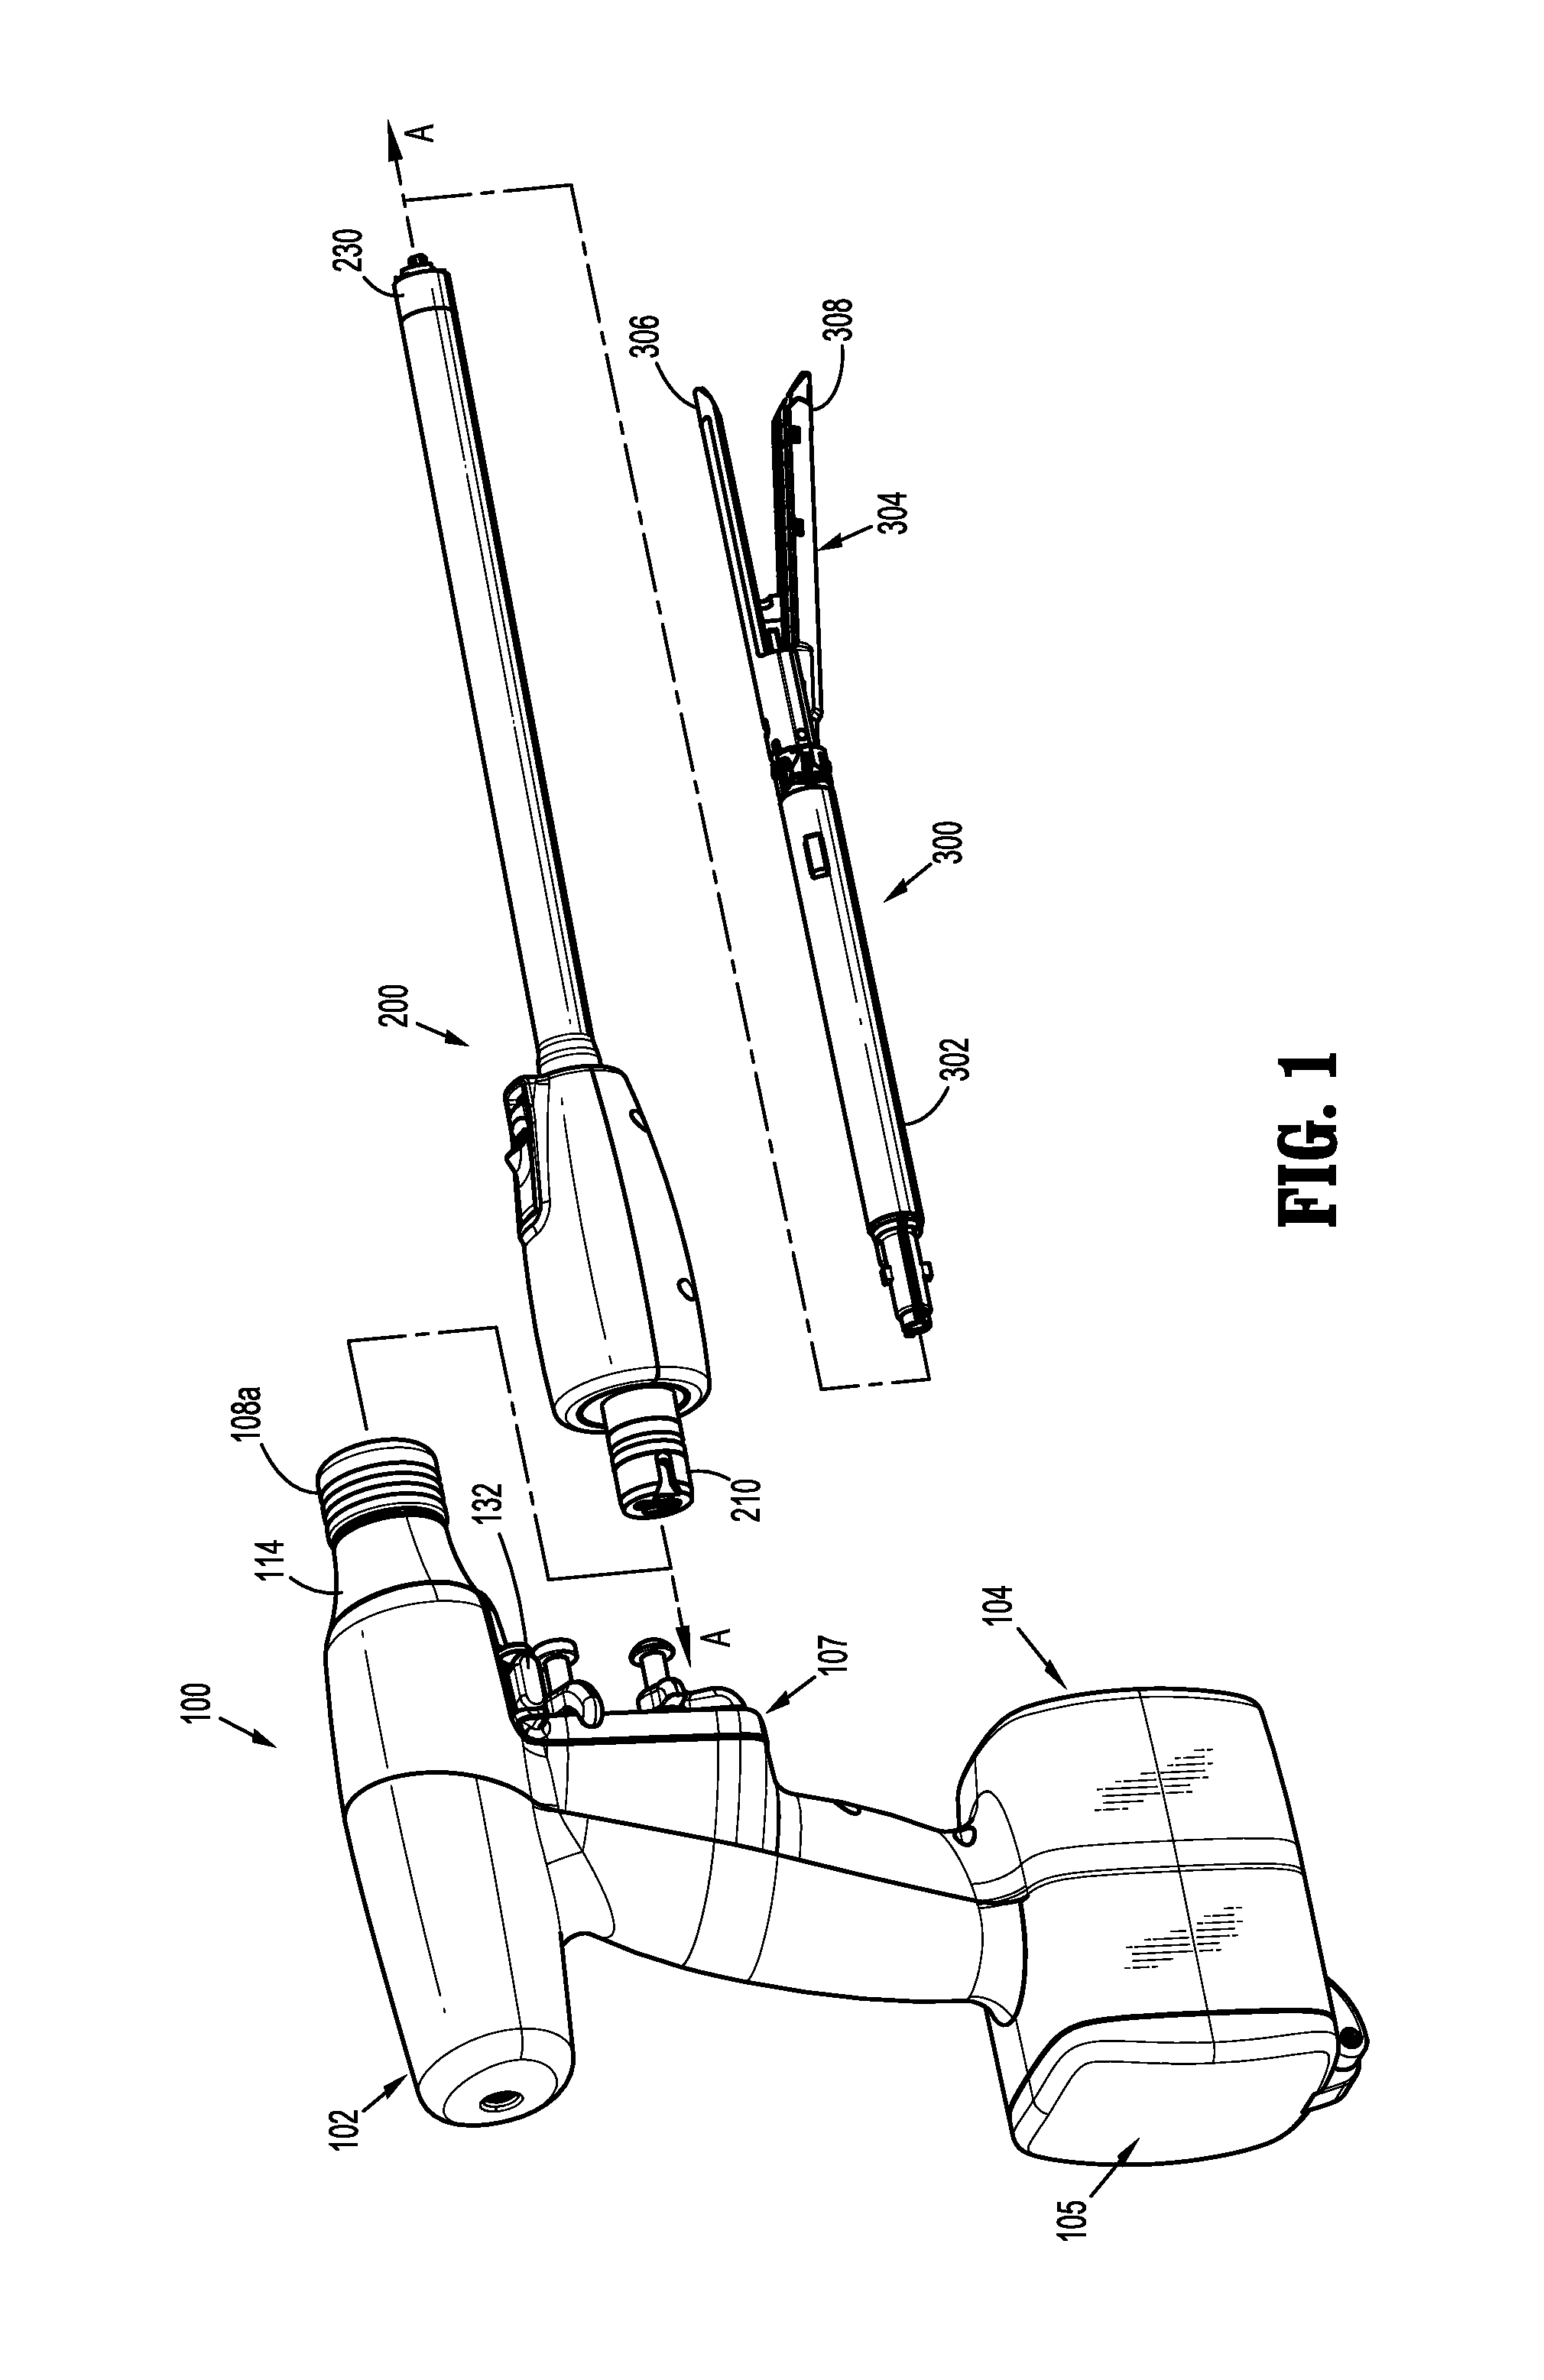 Hand held surgical handle assembly, surgical adapters for use between surgical handle assembly and surgical loading units, and methods of use